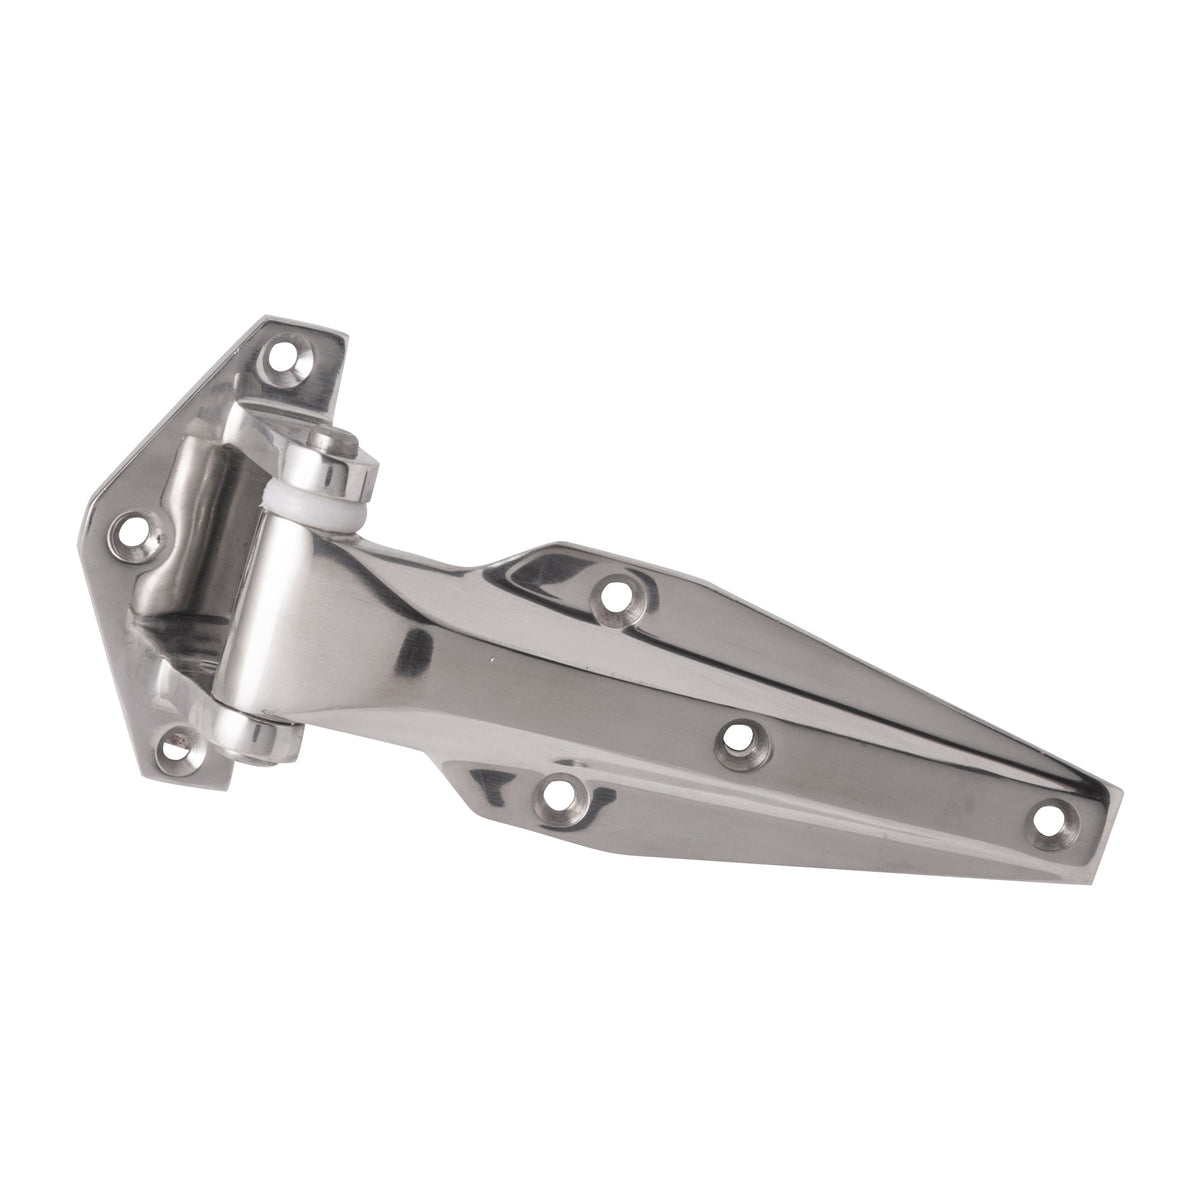 Refrigeration Hinges - 5-1/8" Inch - Multiple Offsets Available - 304 Stainless Steel - Polished Finish - Sold Individually